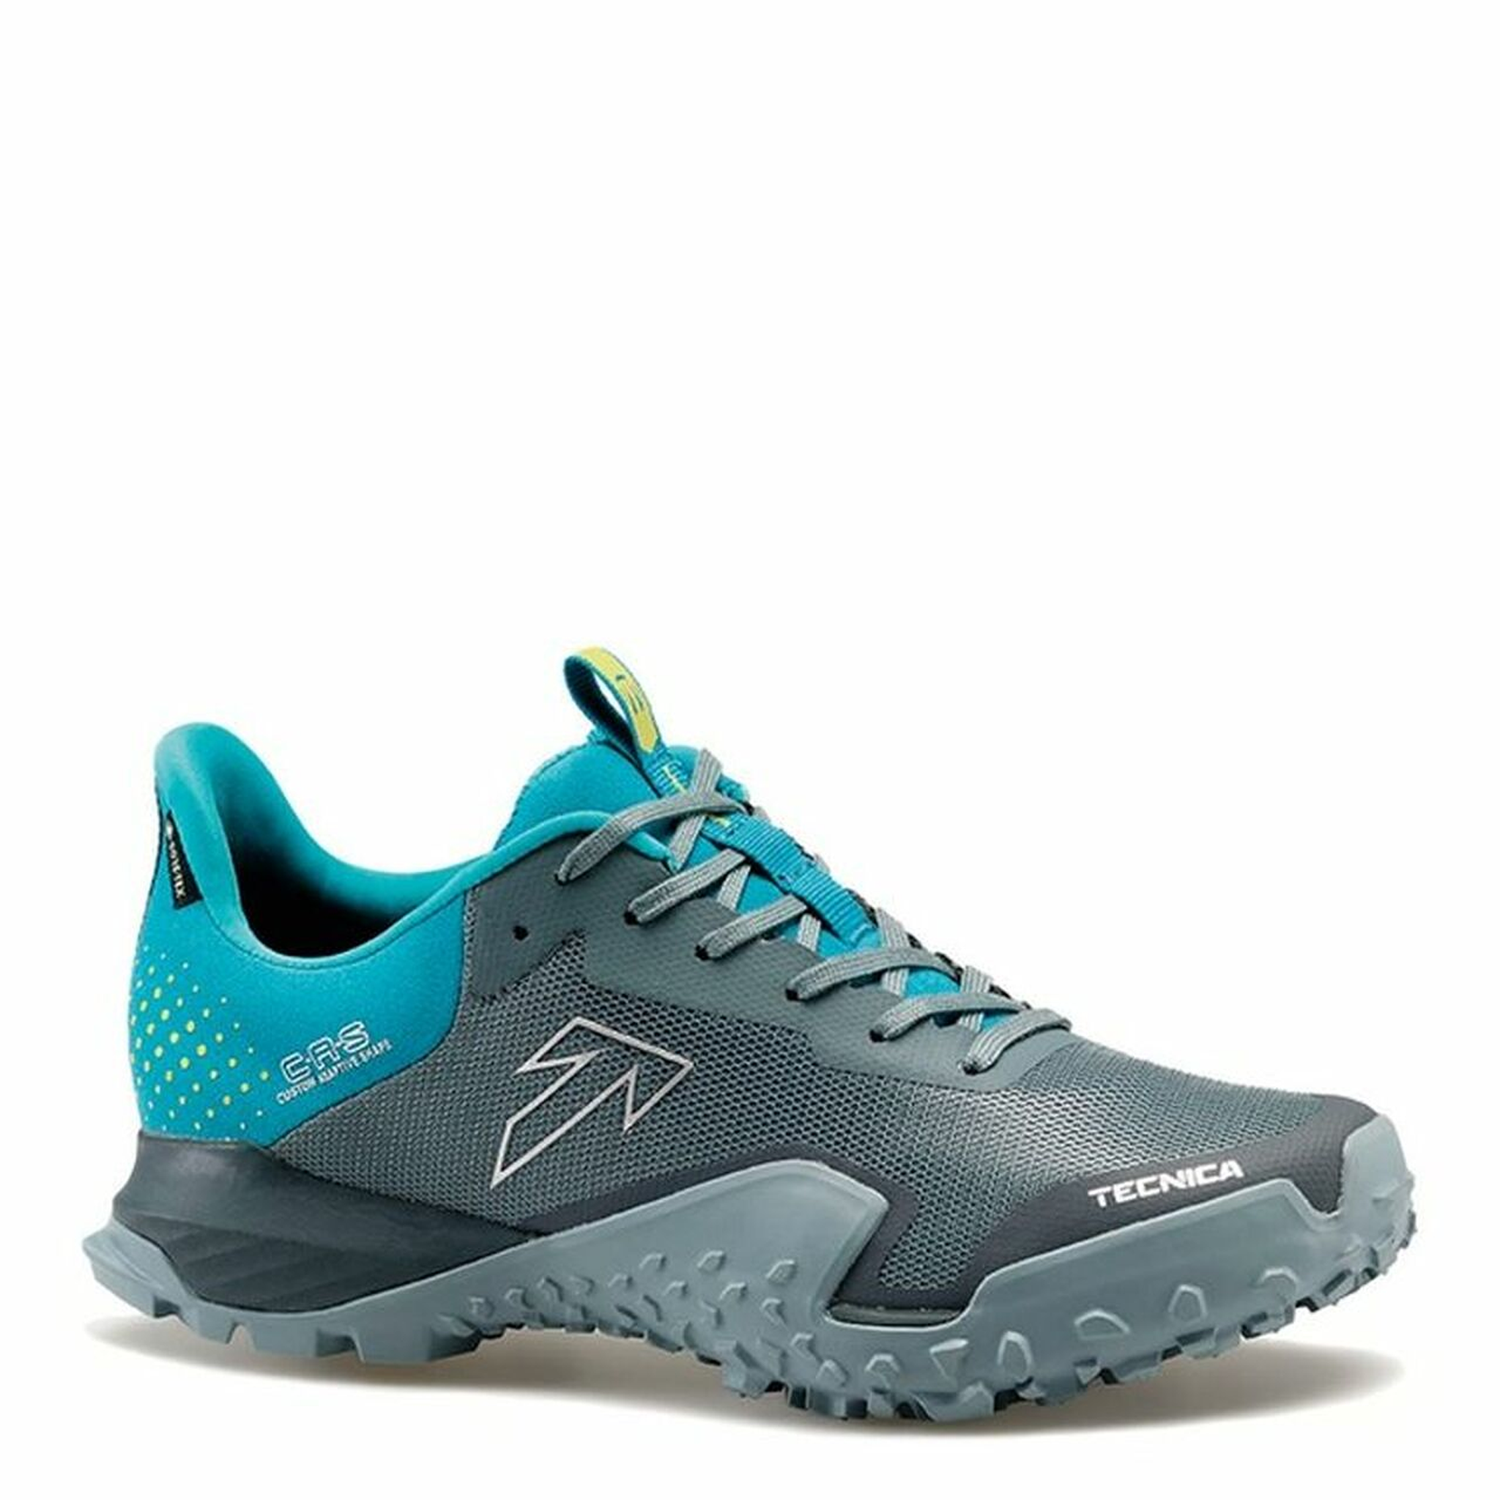 Side view of the Women's Tecnica Magma S GTX trail running shoe in the colour Fiume/Laguna 